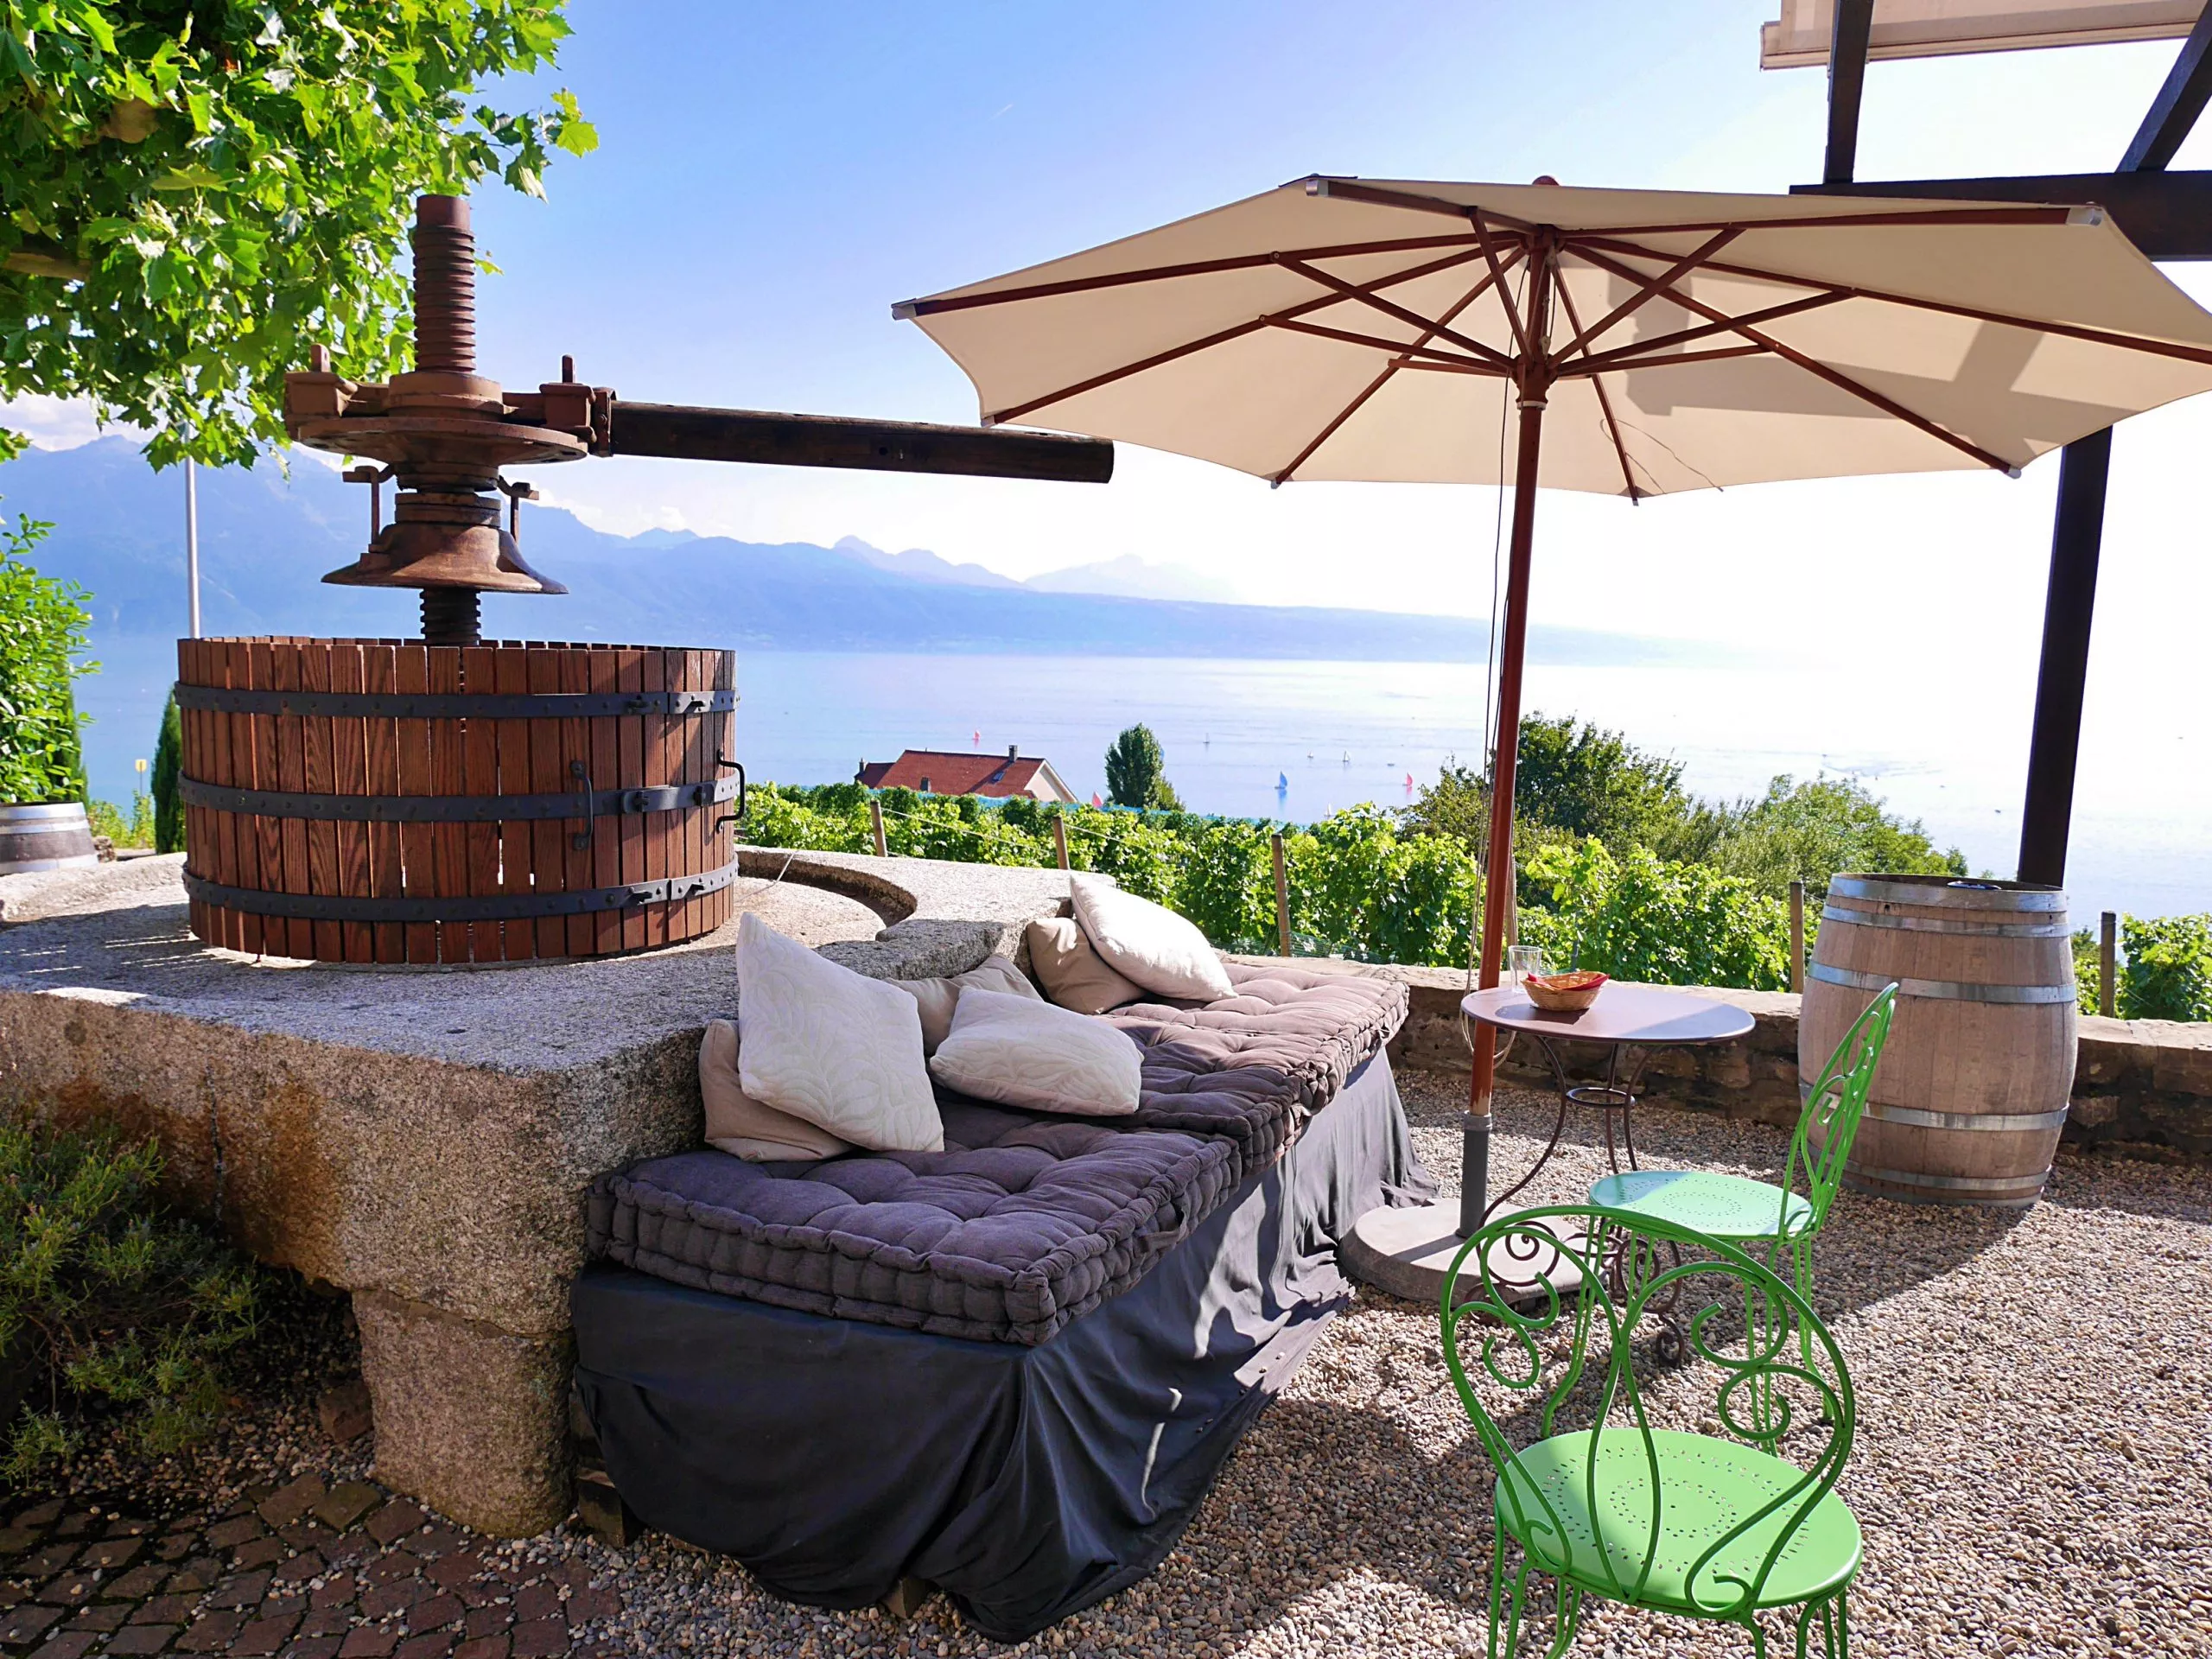 Domaine du Daley in Switzerland, Europe | Wineries - Rated 0.7